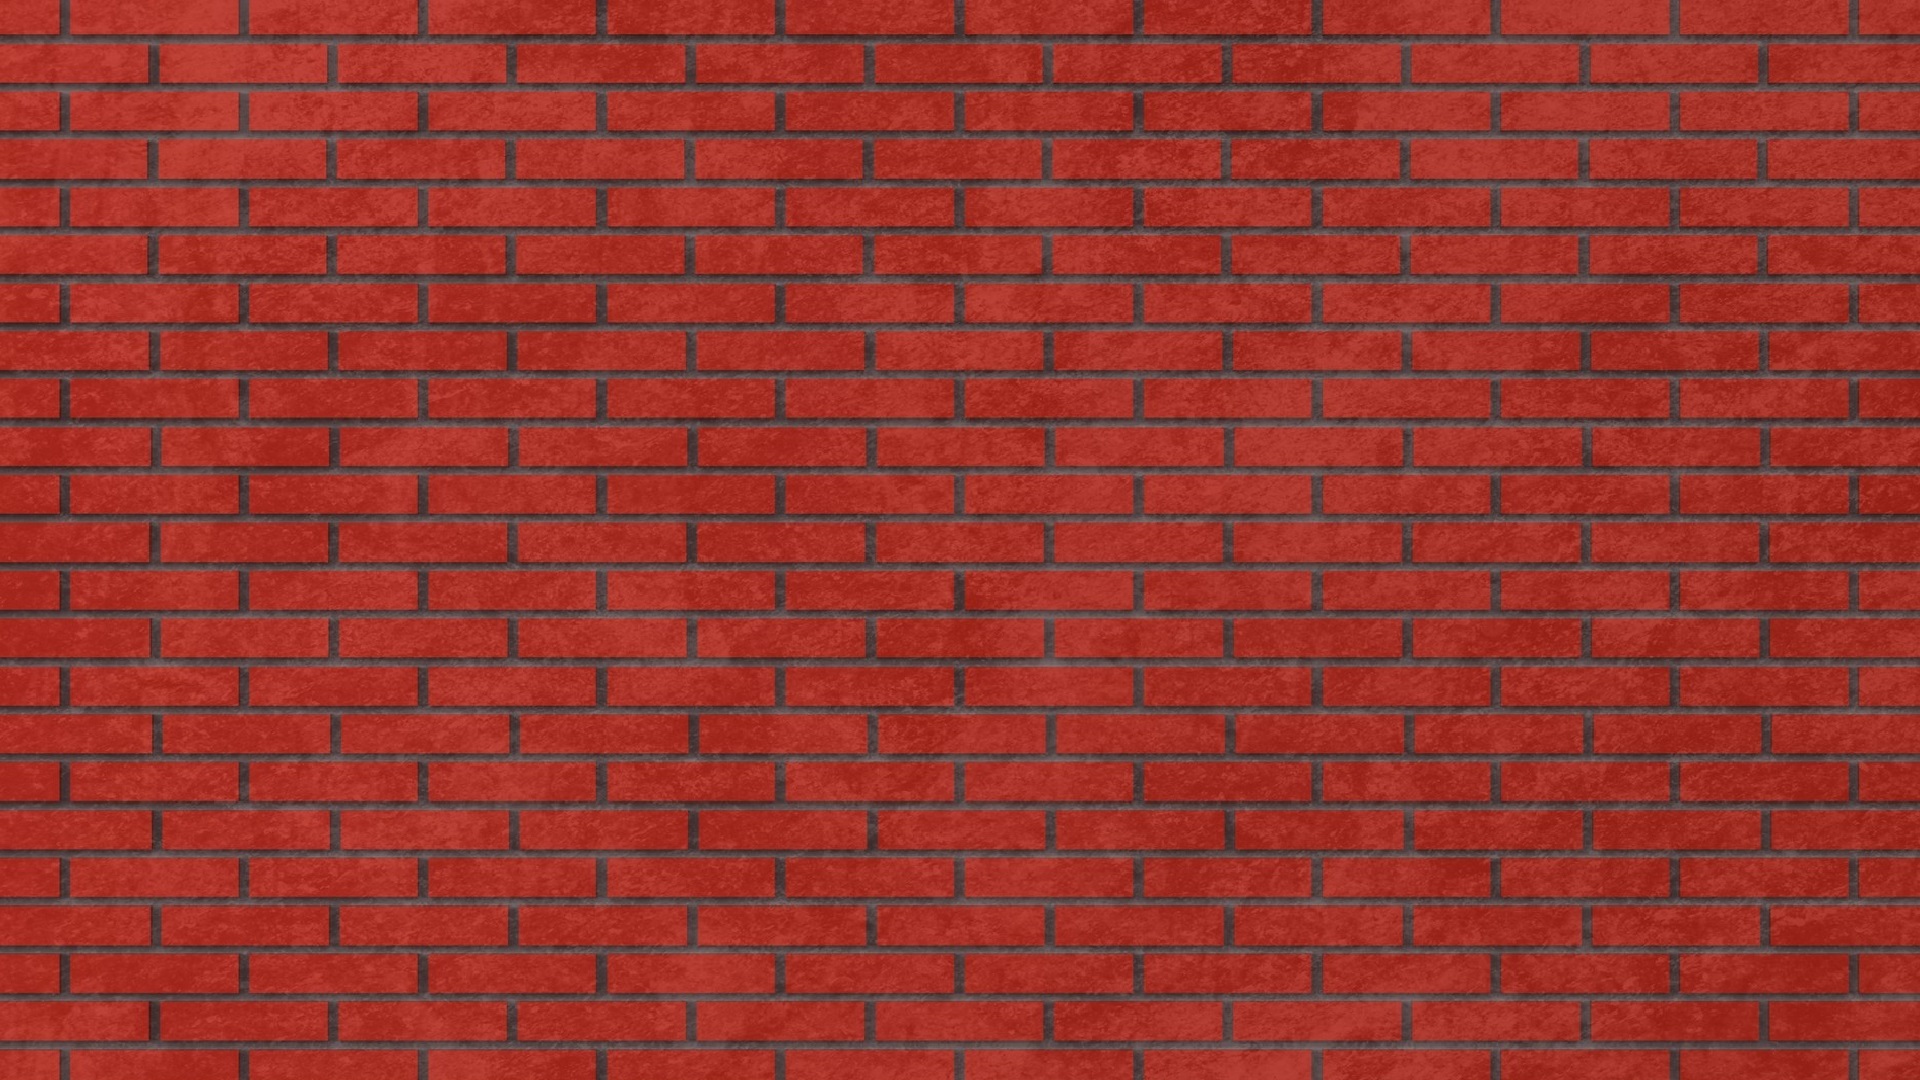 Brick Desktop Wallpaper With high-resolution 1920X1080 pixel. You can use this wallpaper for your Windows and Mac OS computers as well as your Android and iPhone smartphones